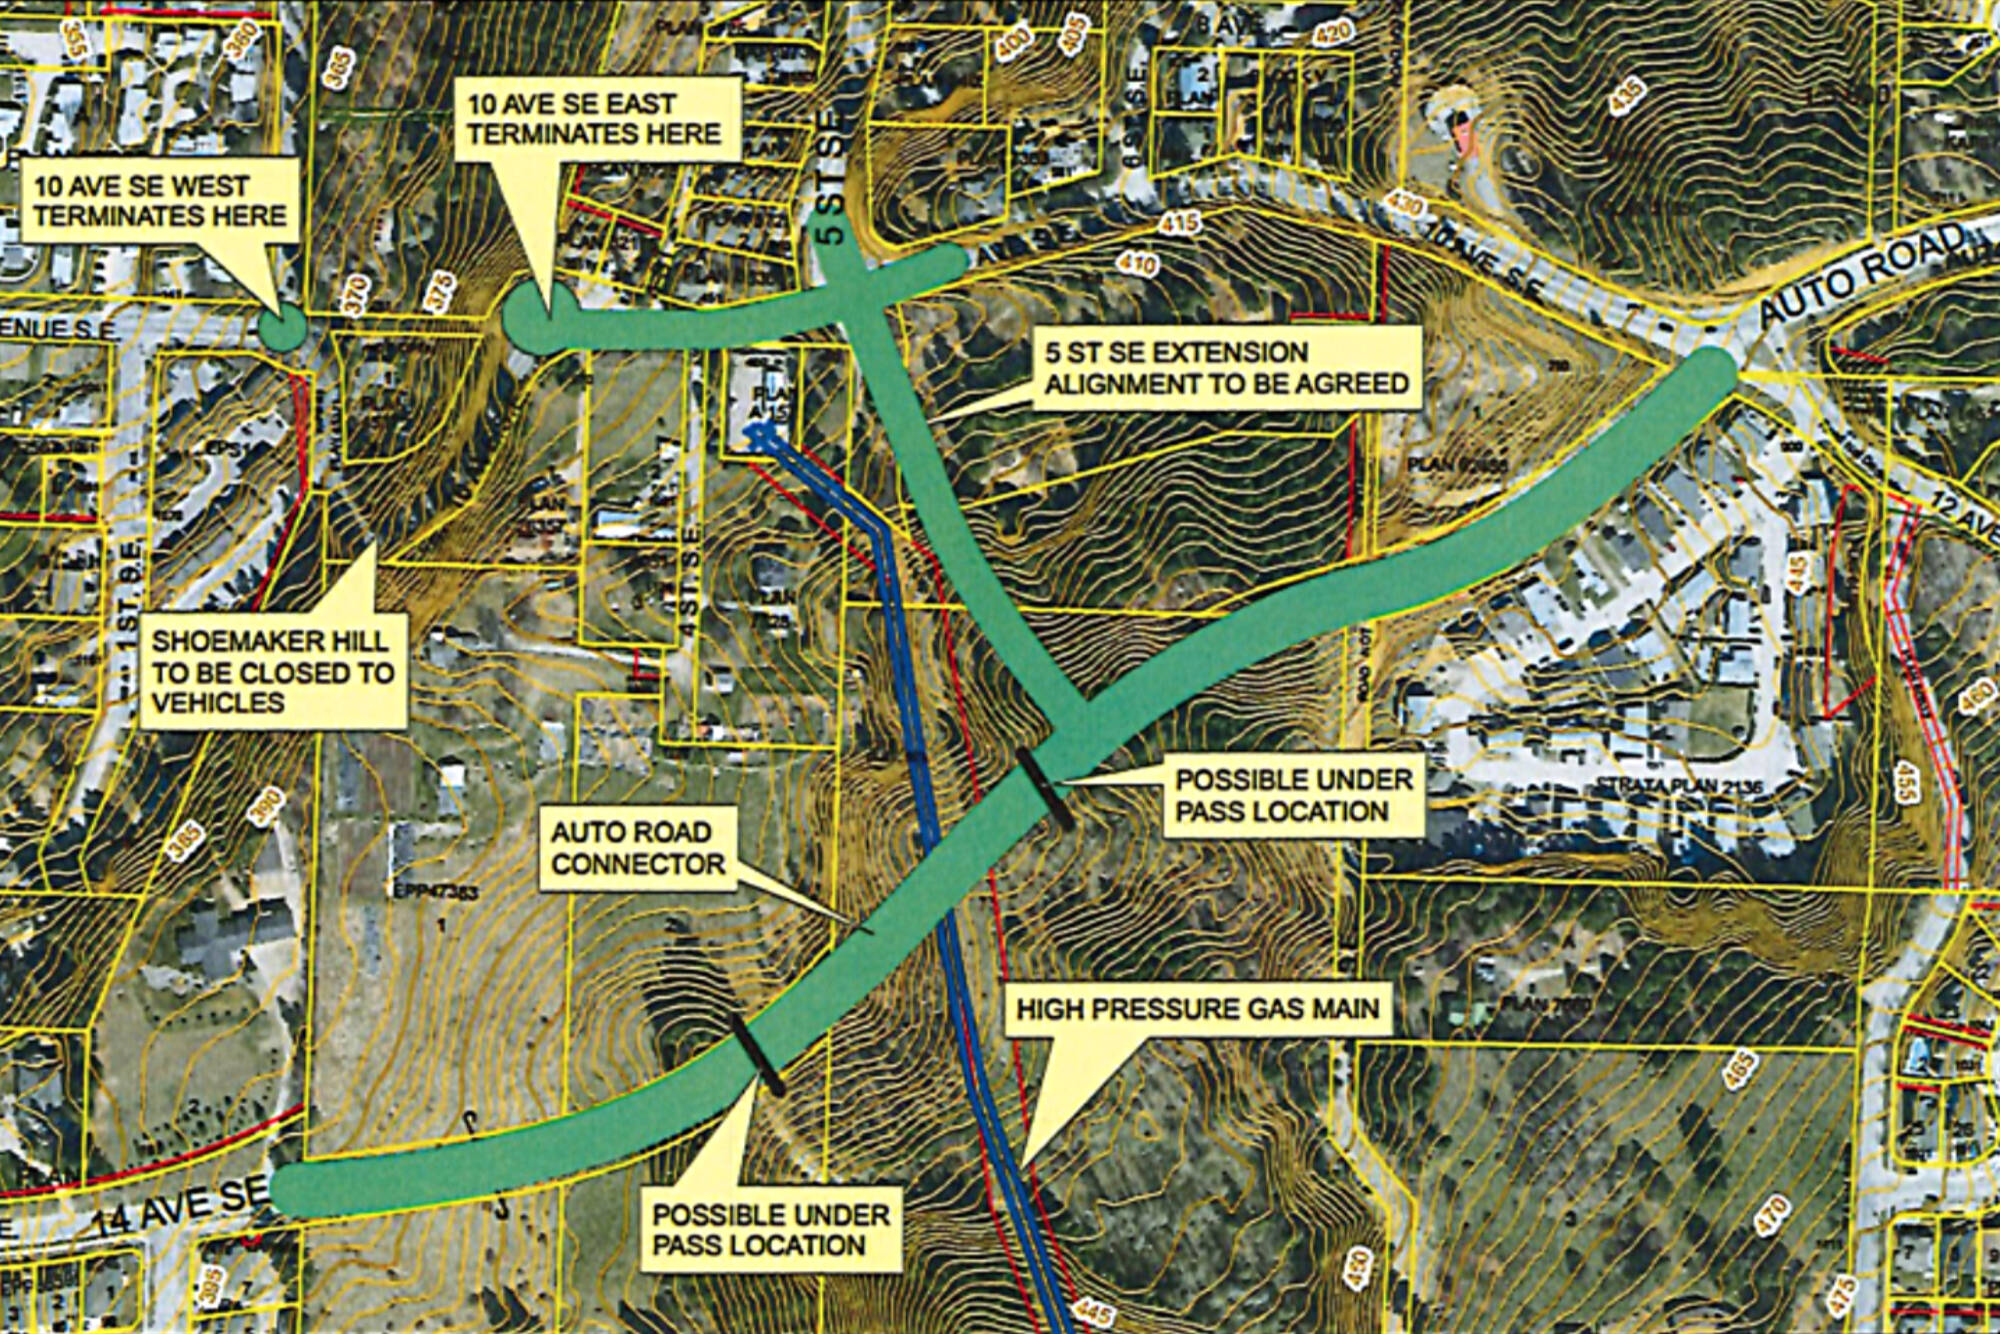 A city map shows proposed changes to facilitate the Auto Road Connector which include closing steep, winding Shoemaker Hill on 10th Avenue SE and connecting Auto Road to 14th Avenue SE. (City of Salmon Arm image)